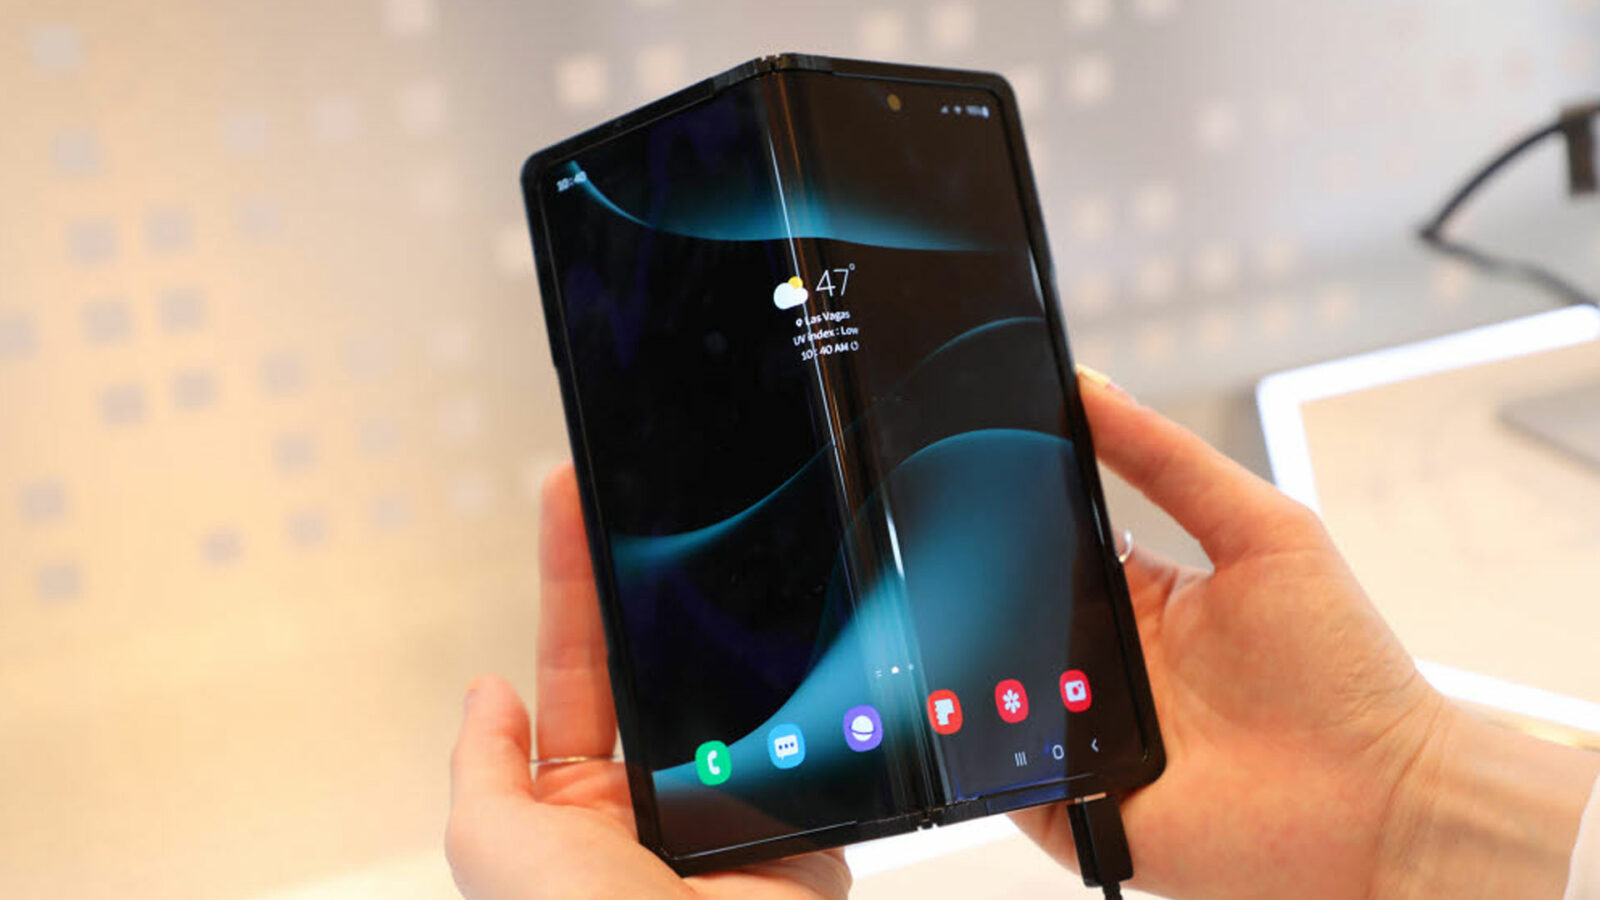 Samsung shows revolutionary solution for its foldable Galaxy Z Fold